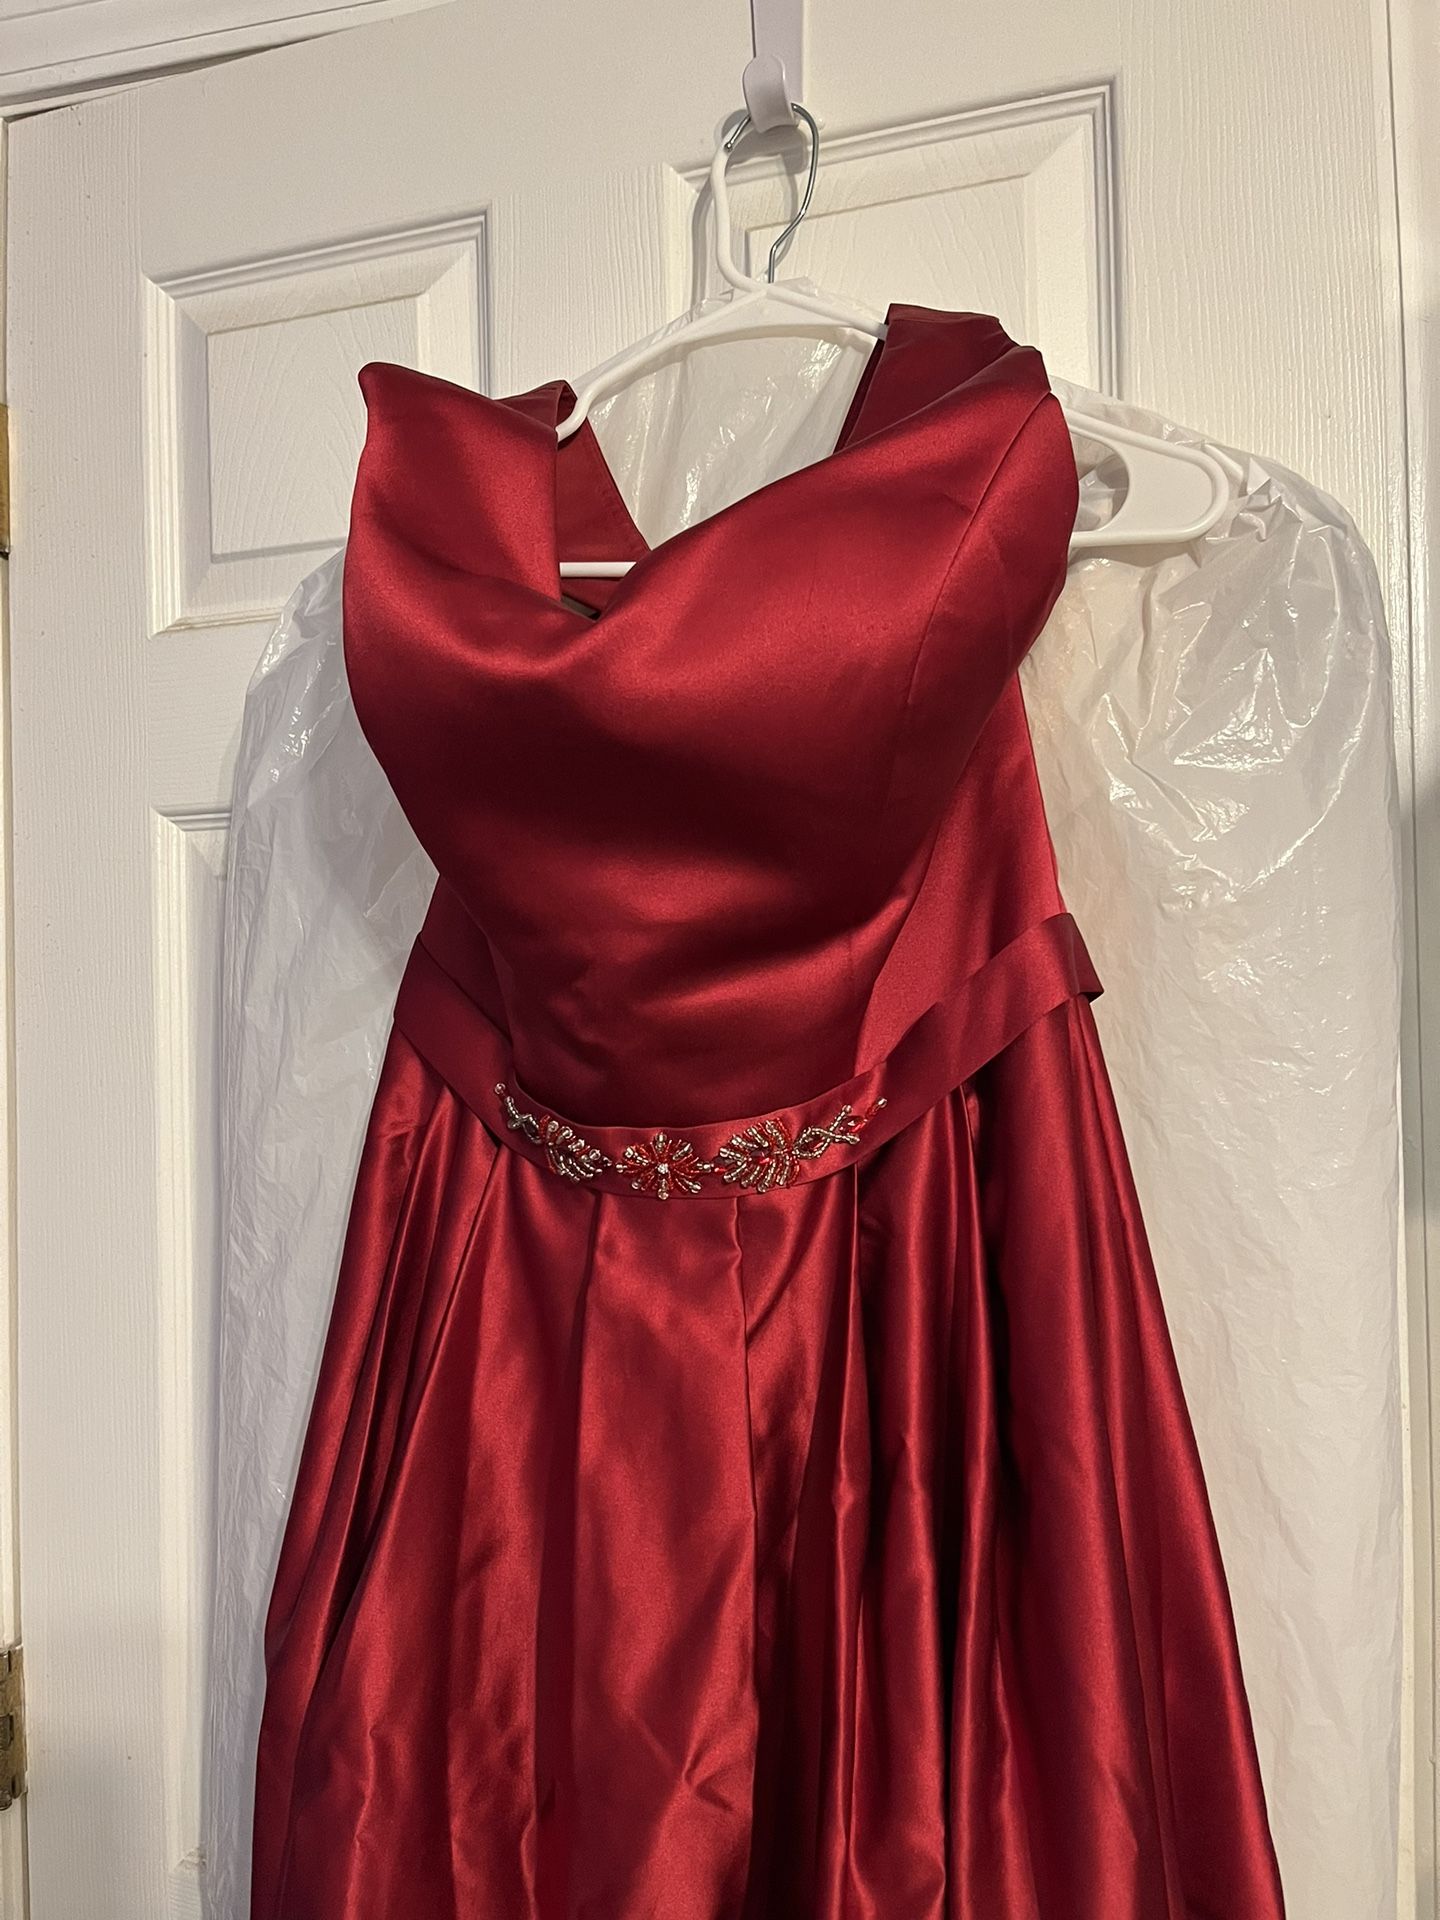 Beautiful Red Prom Or Formal Dress